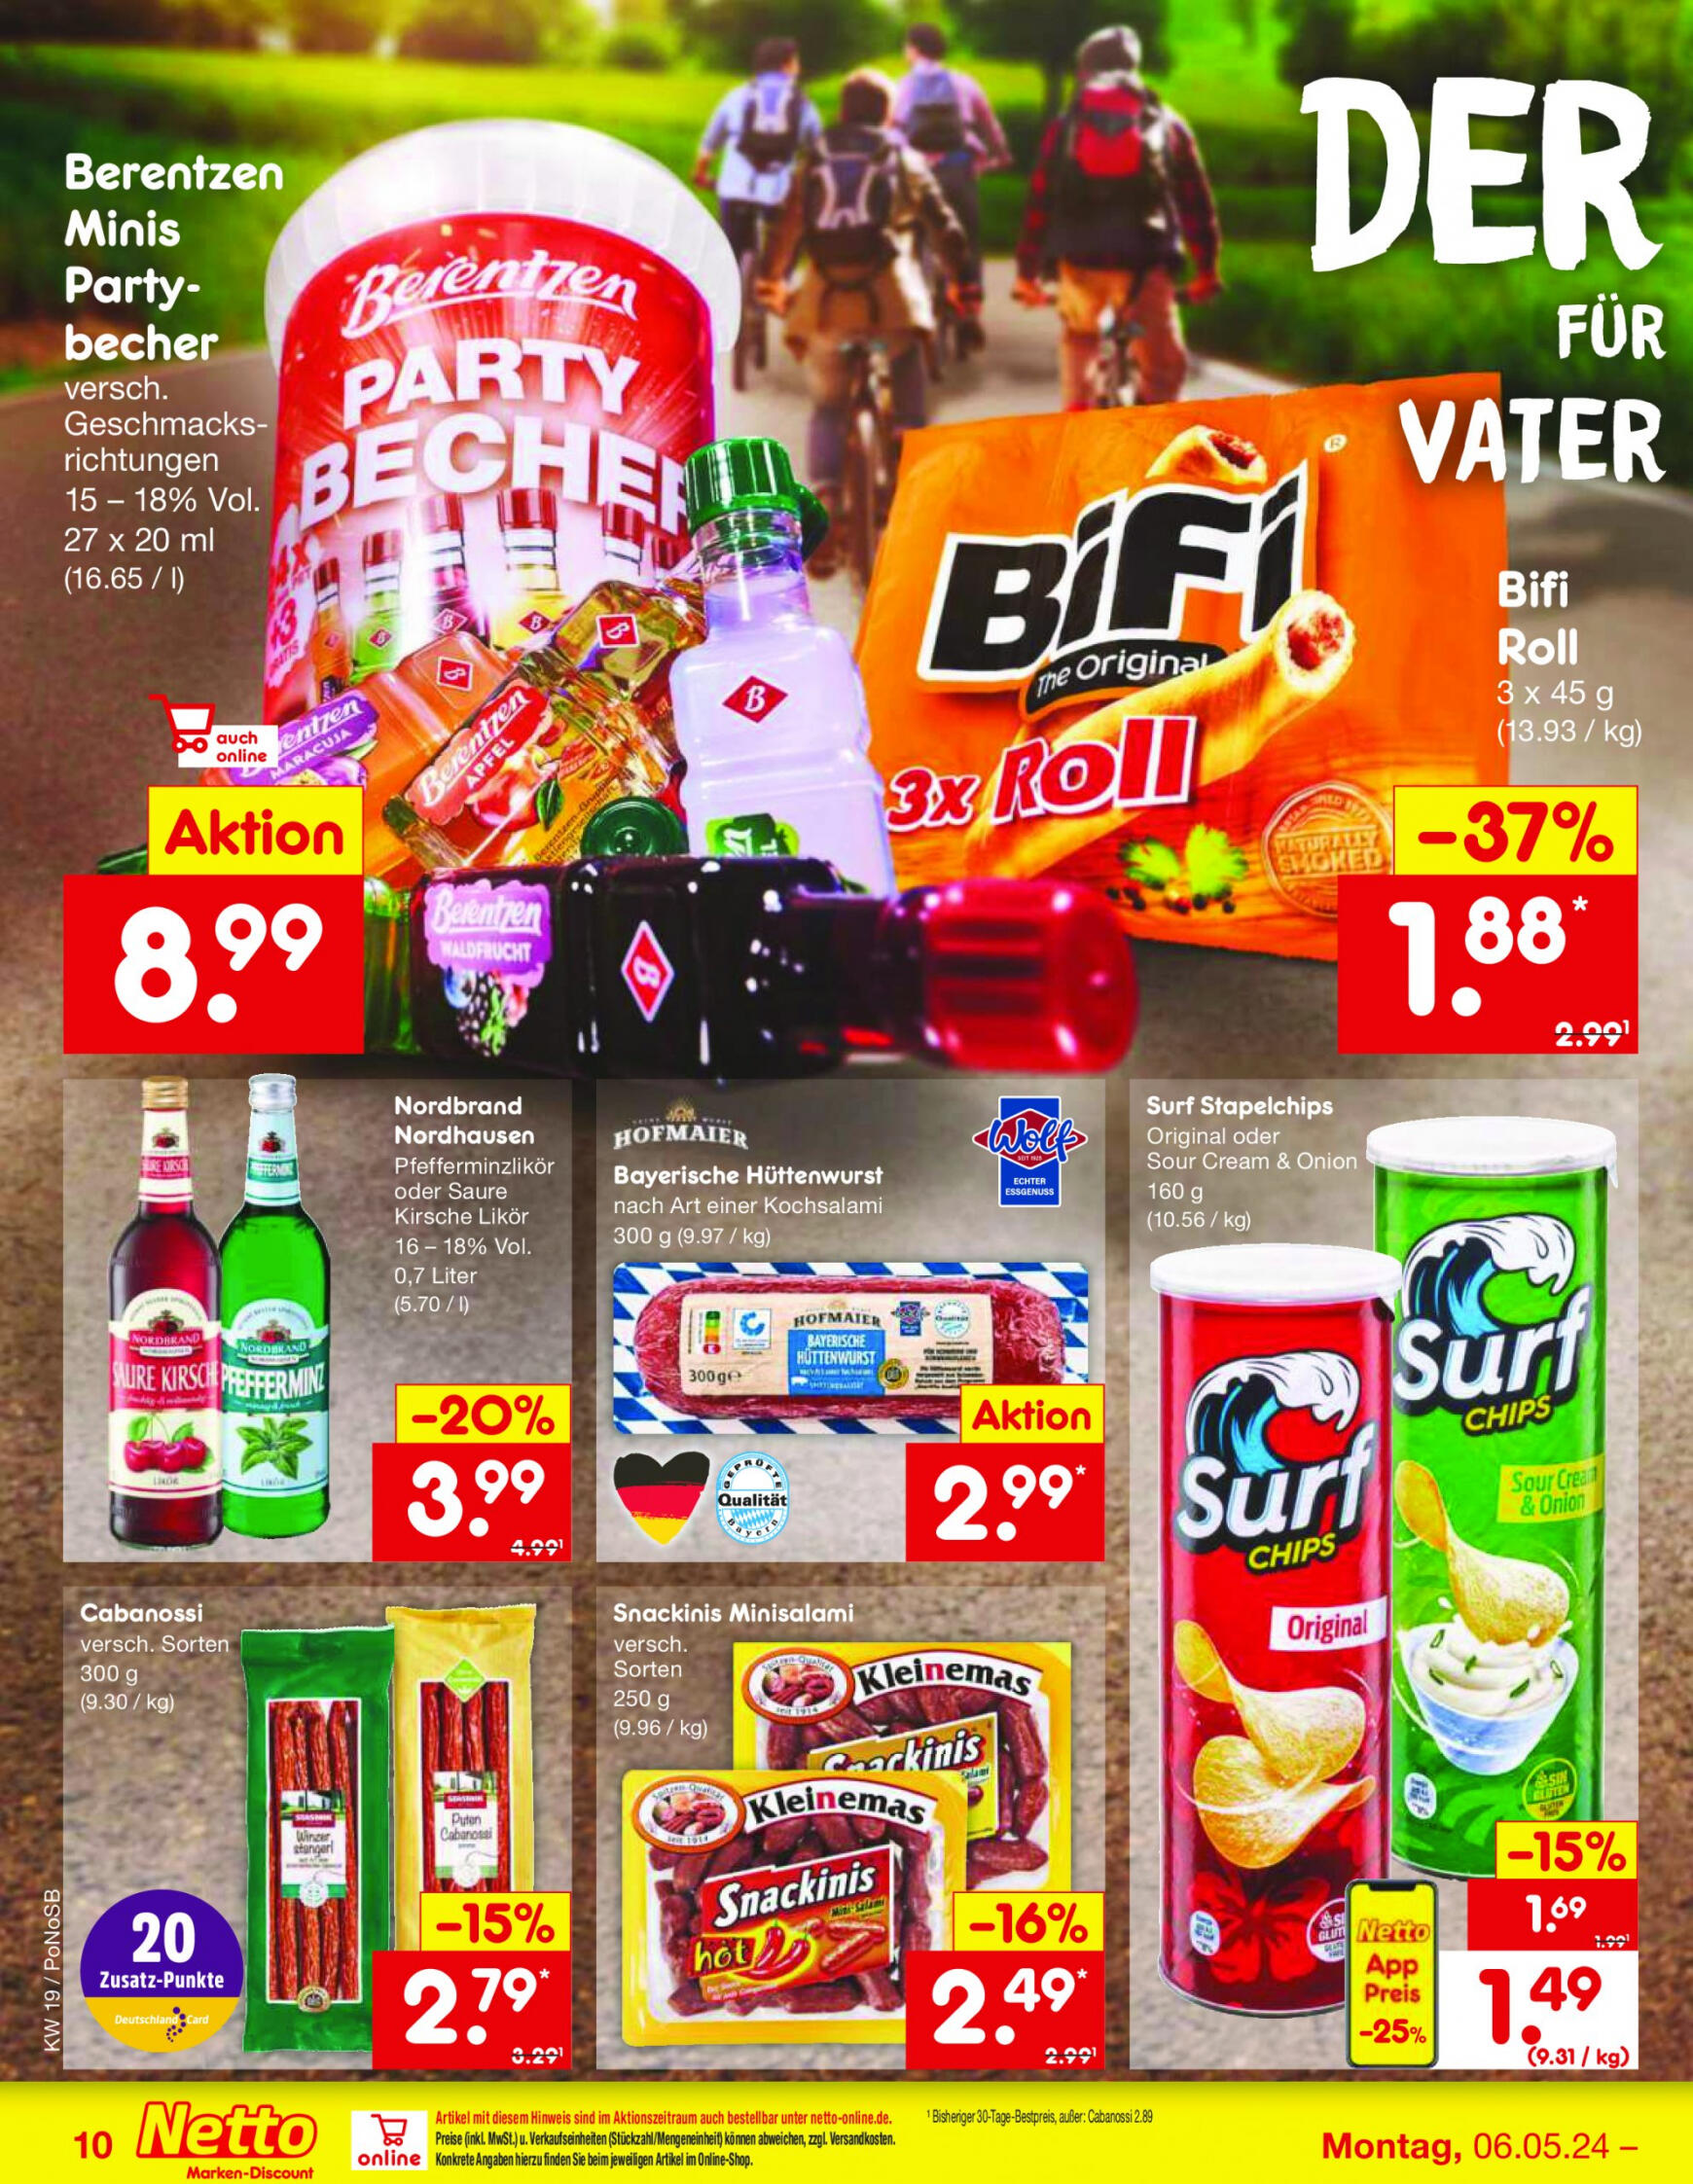 netto - Flyer Netto aktuell 06.05. - 11.05. - page: 10